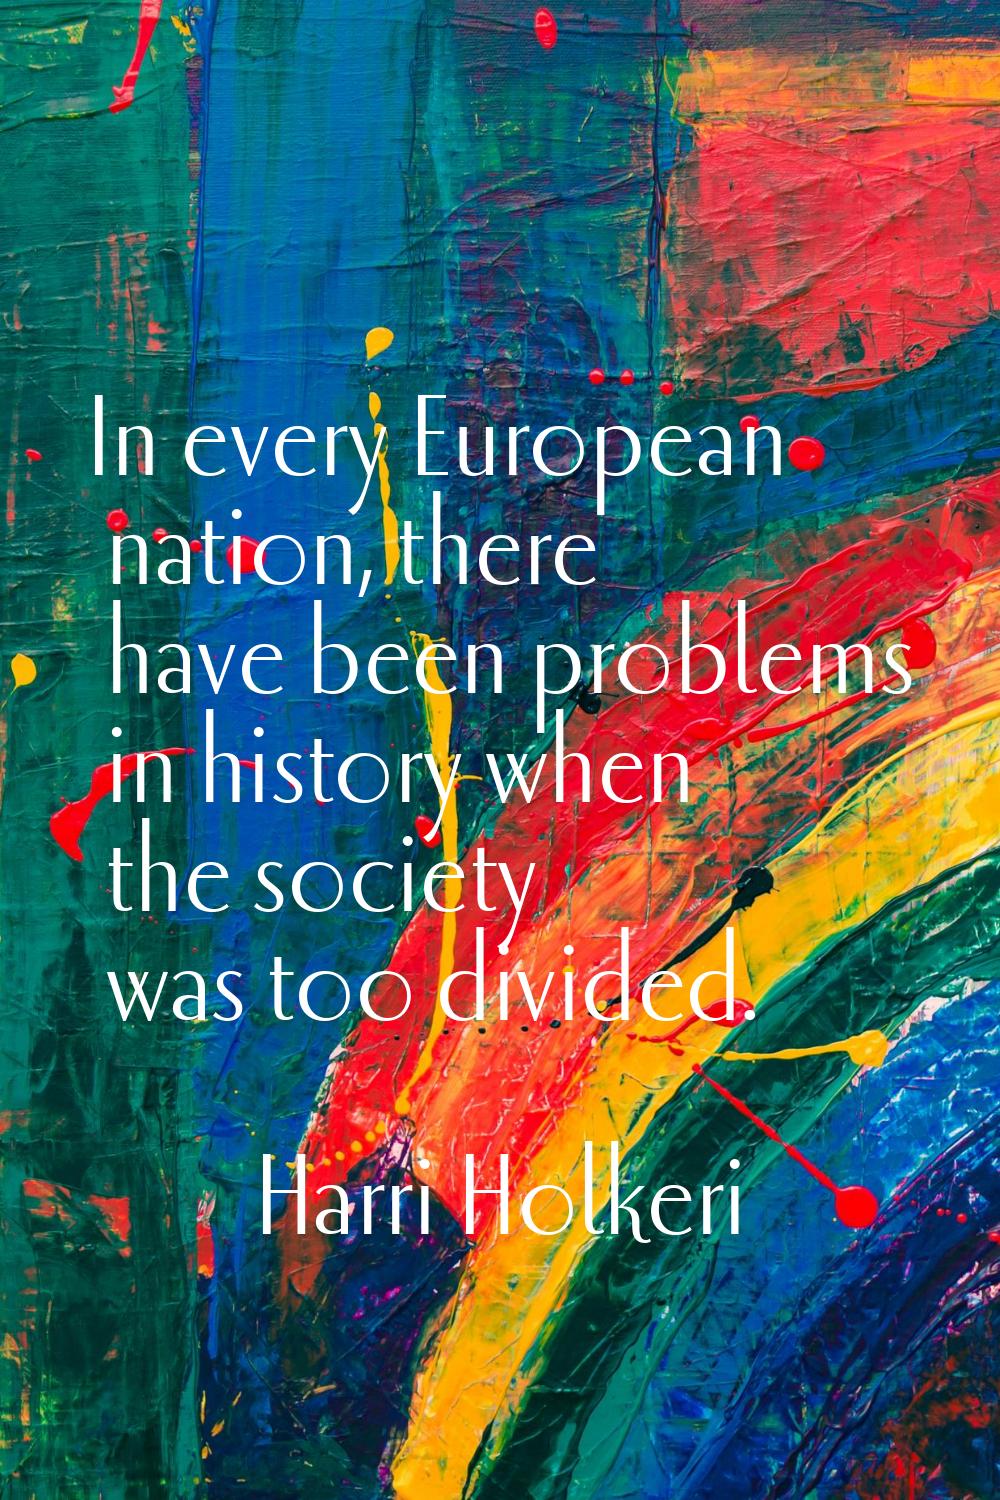 In every European nation, there have been problems in history when the society was too divided.